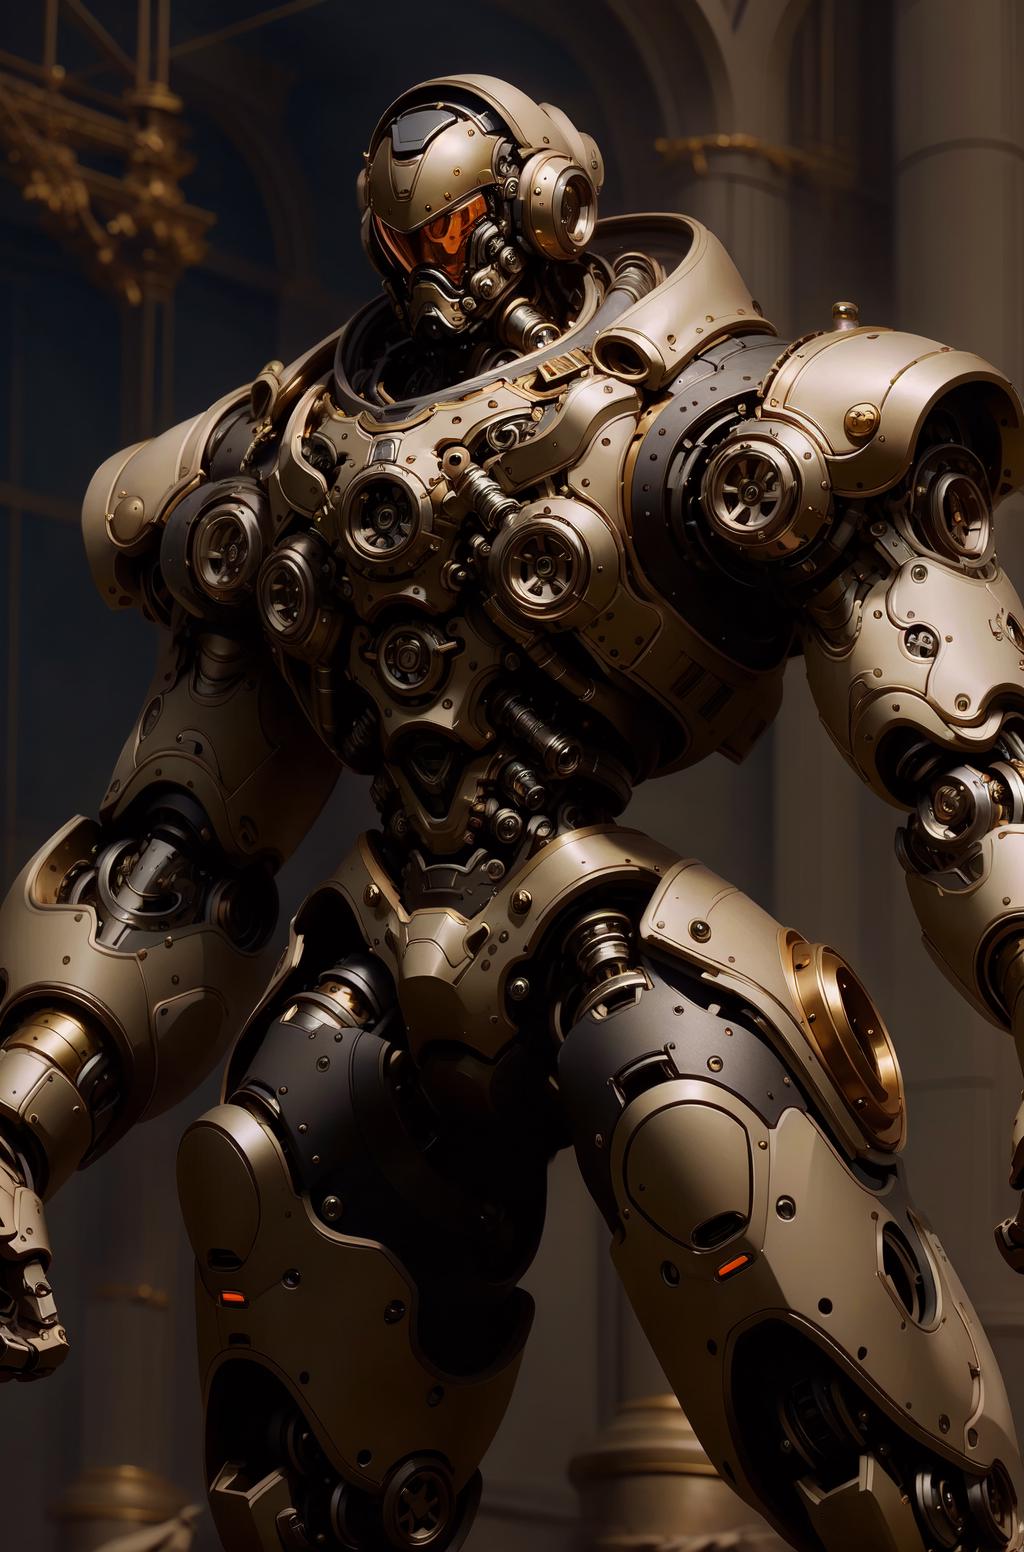 A robot with a gold and silver body and gears.